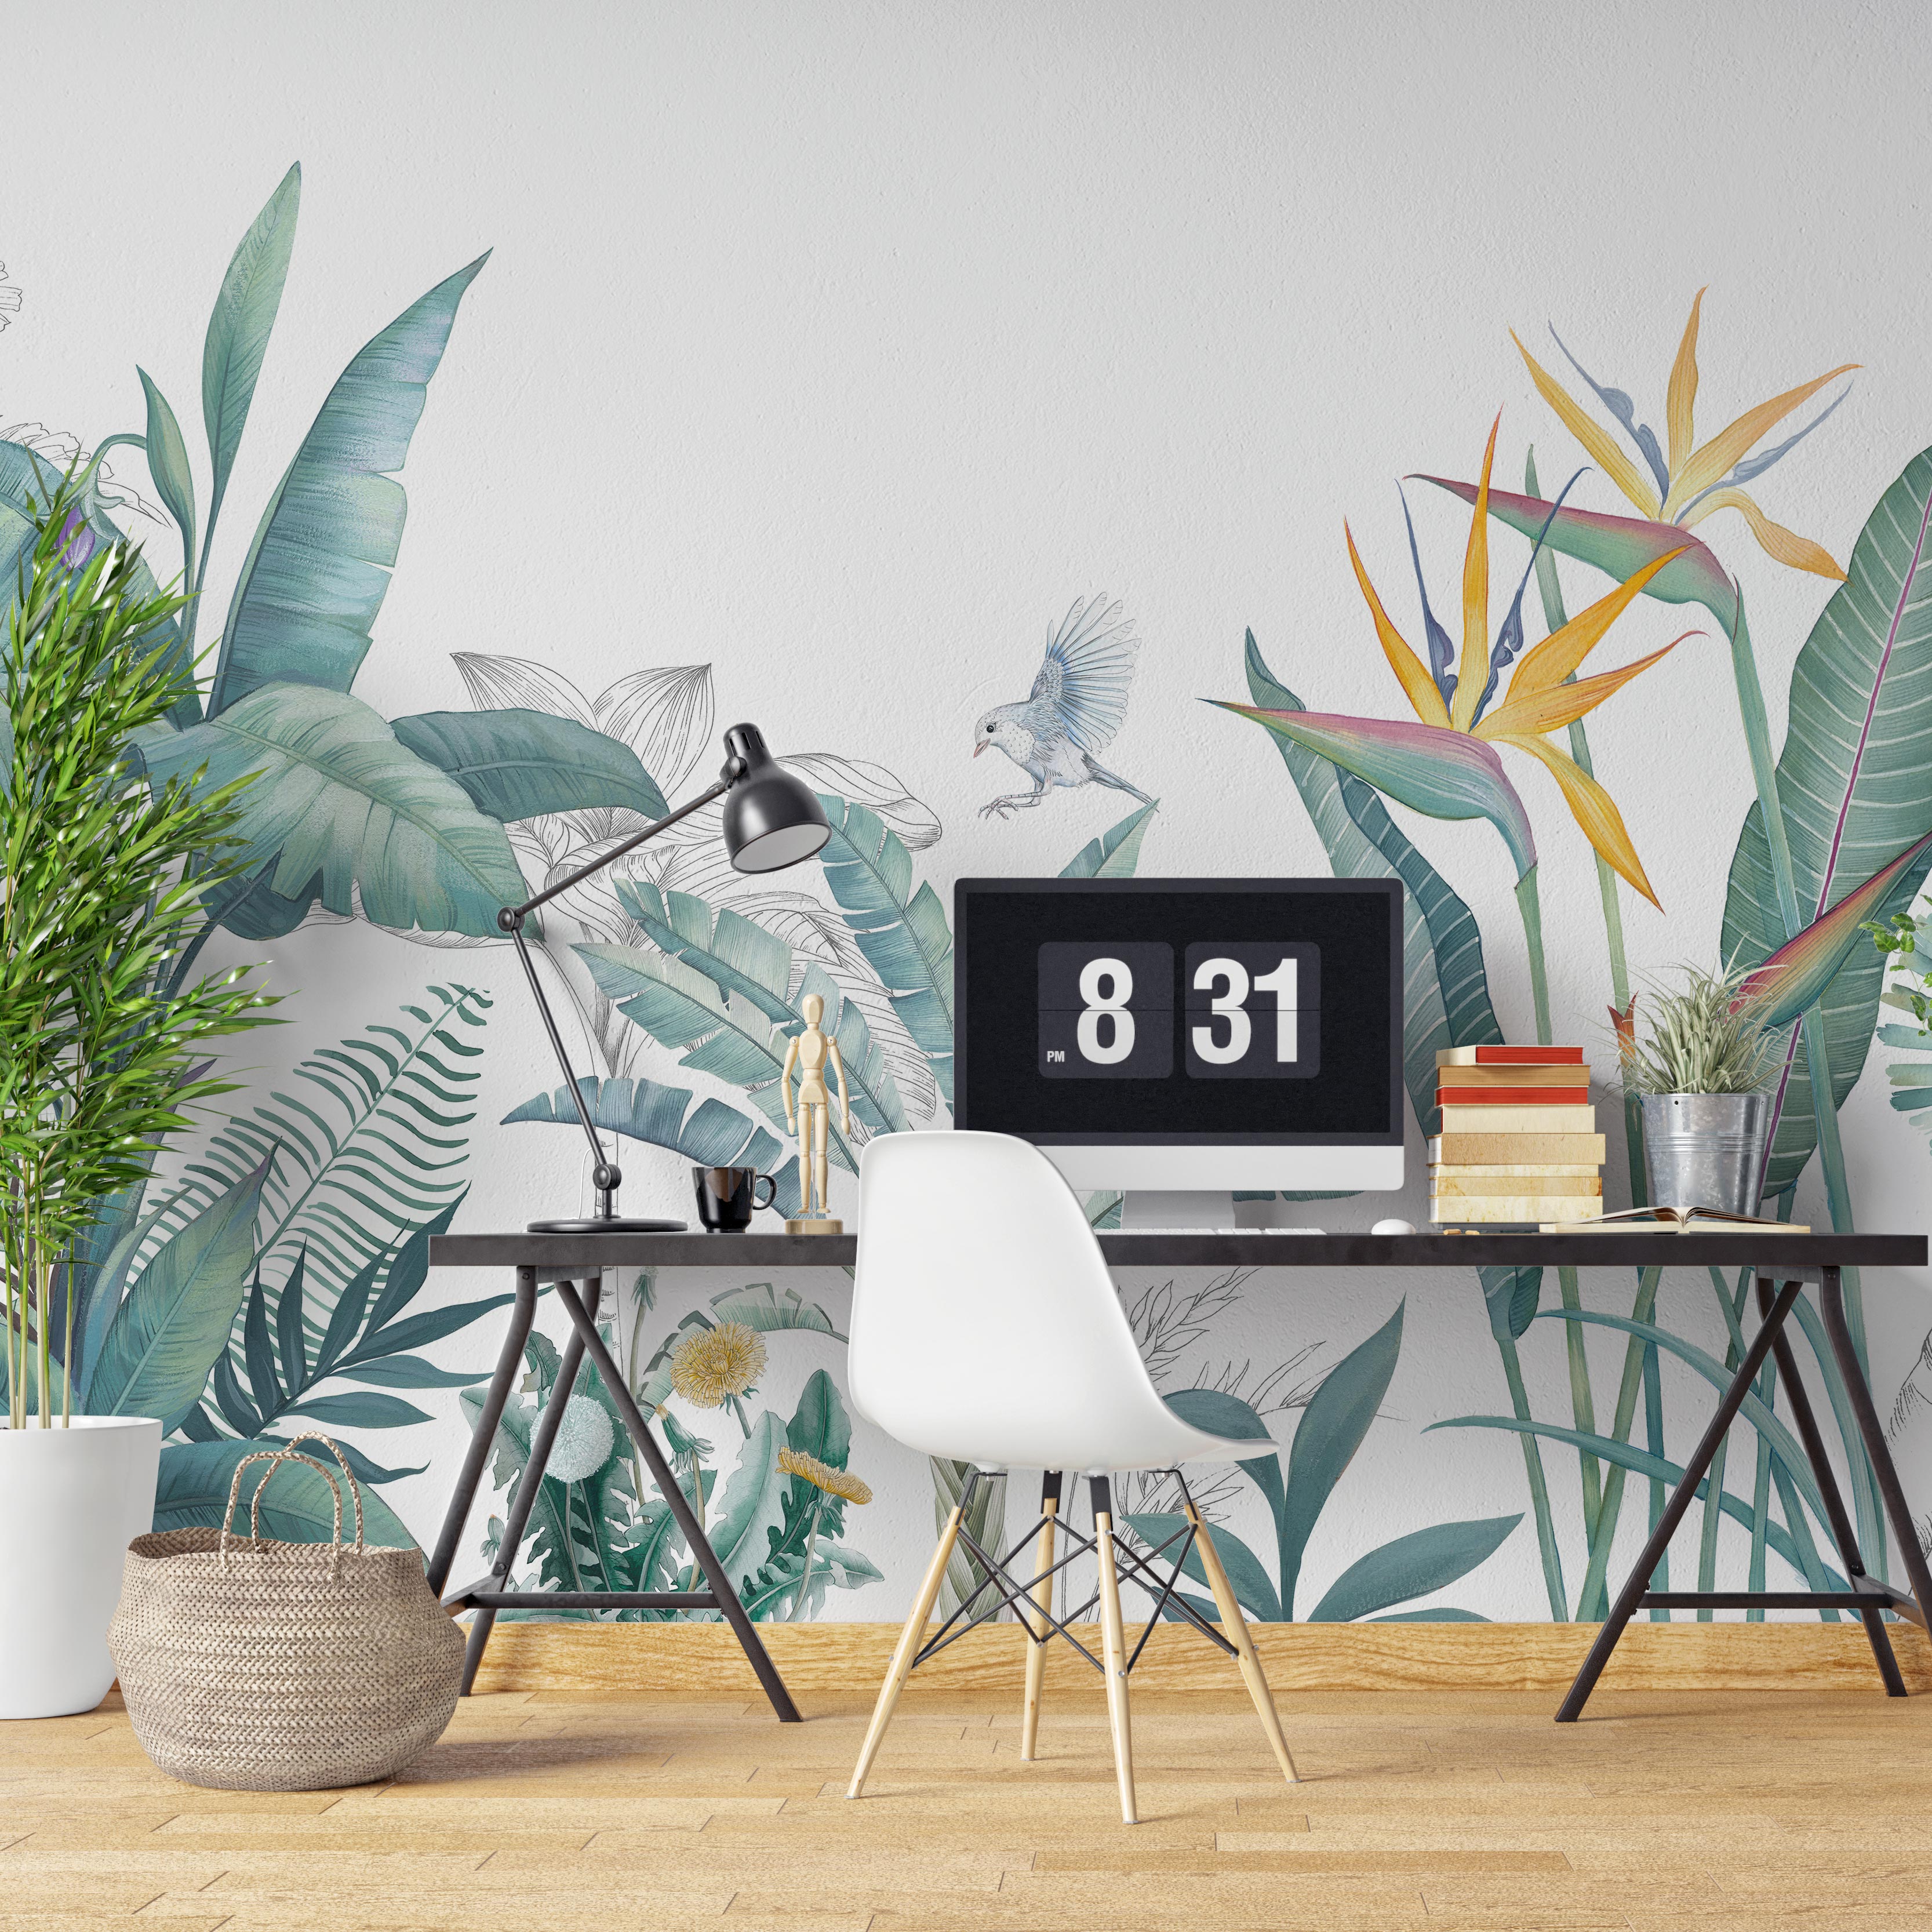 Minimalist home office with sage botanical wallpaper mural